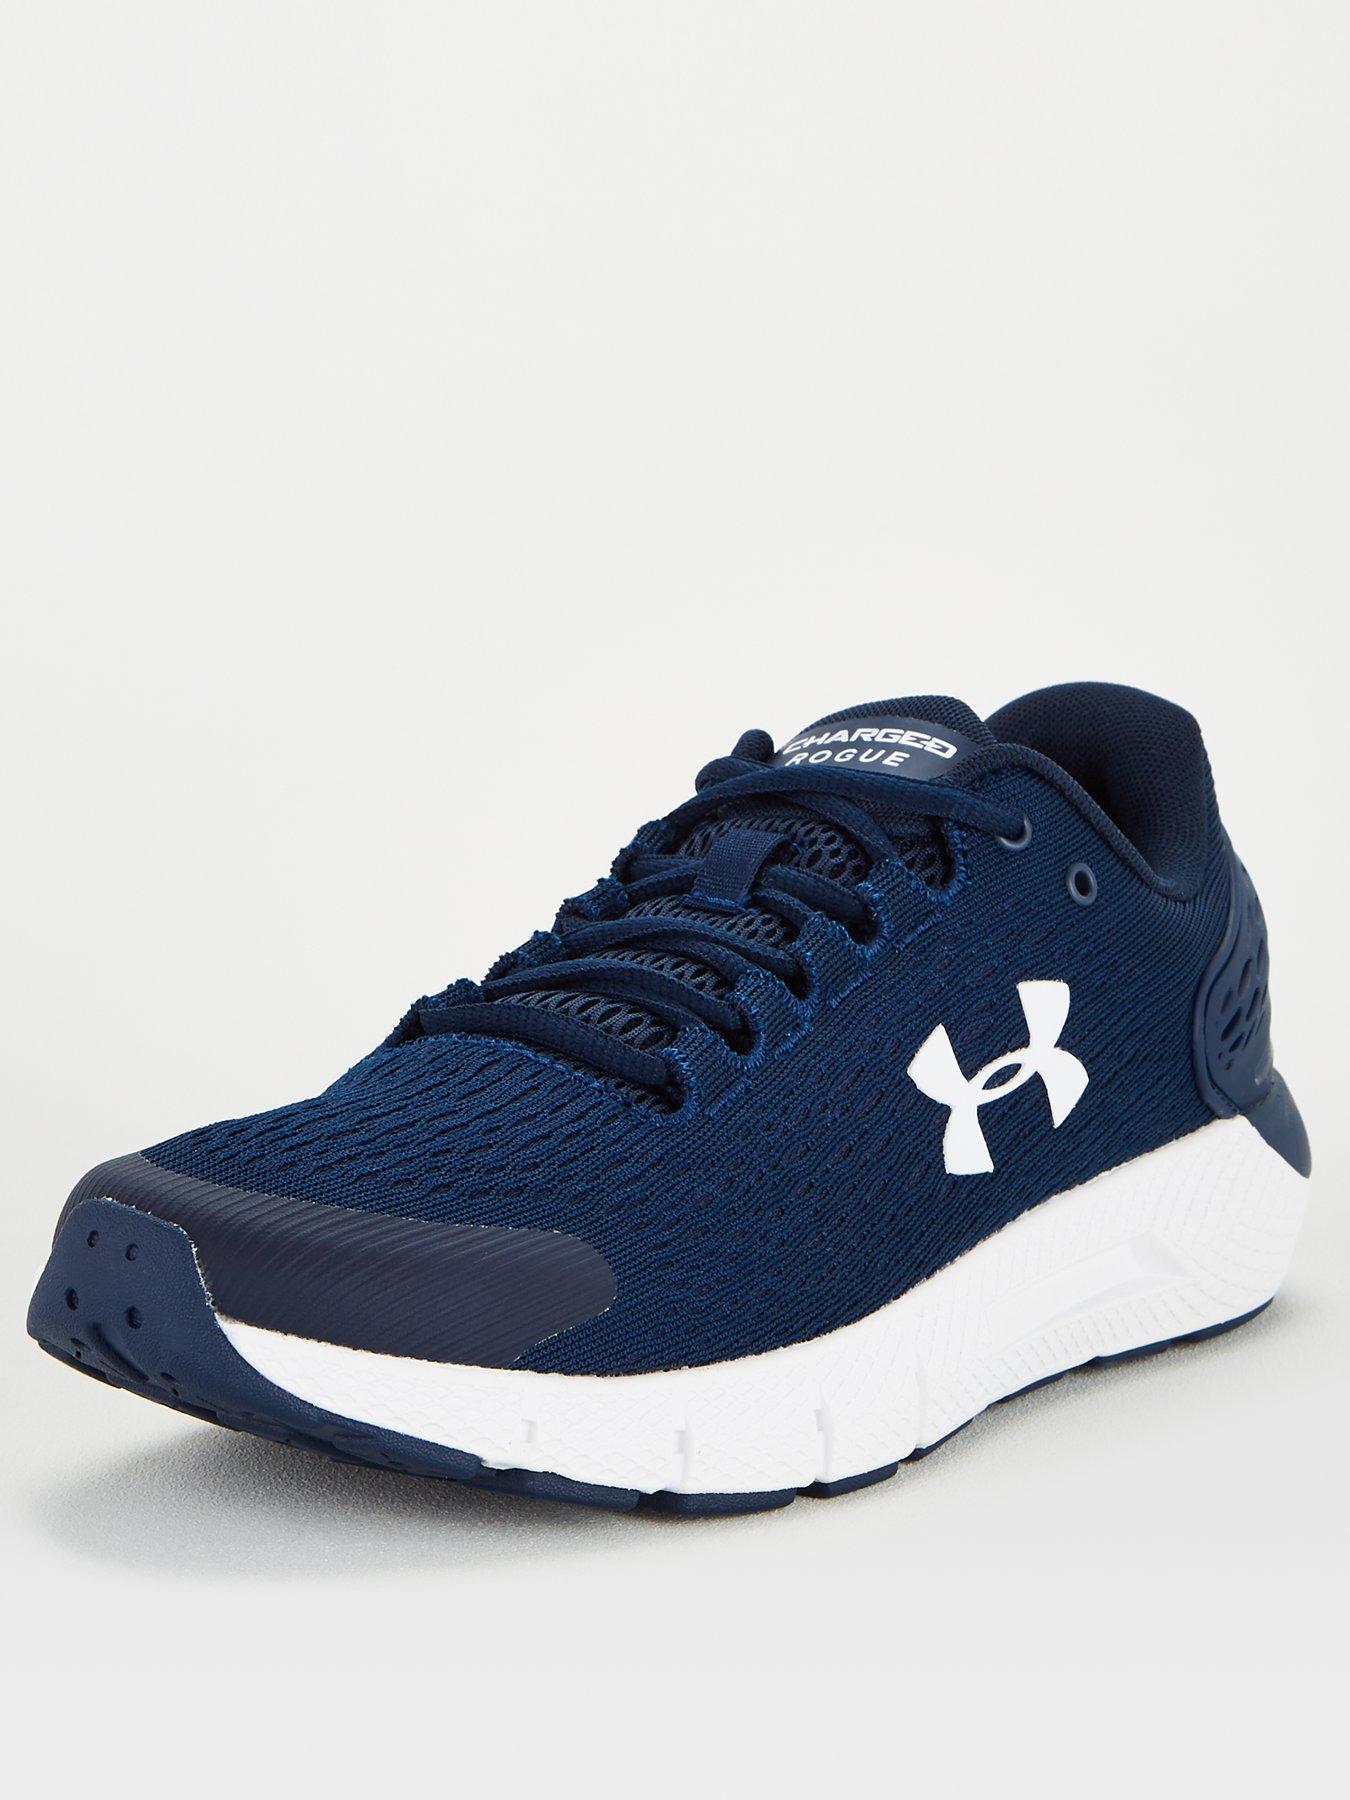 UNDER ARMOUR Charged Rogue 2 - Navy 